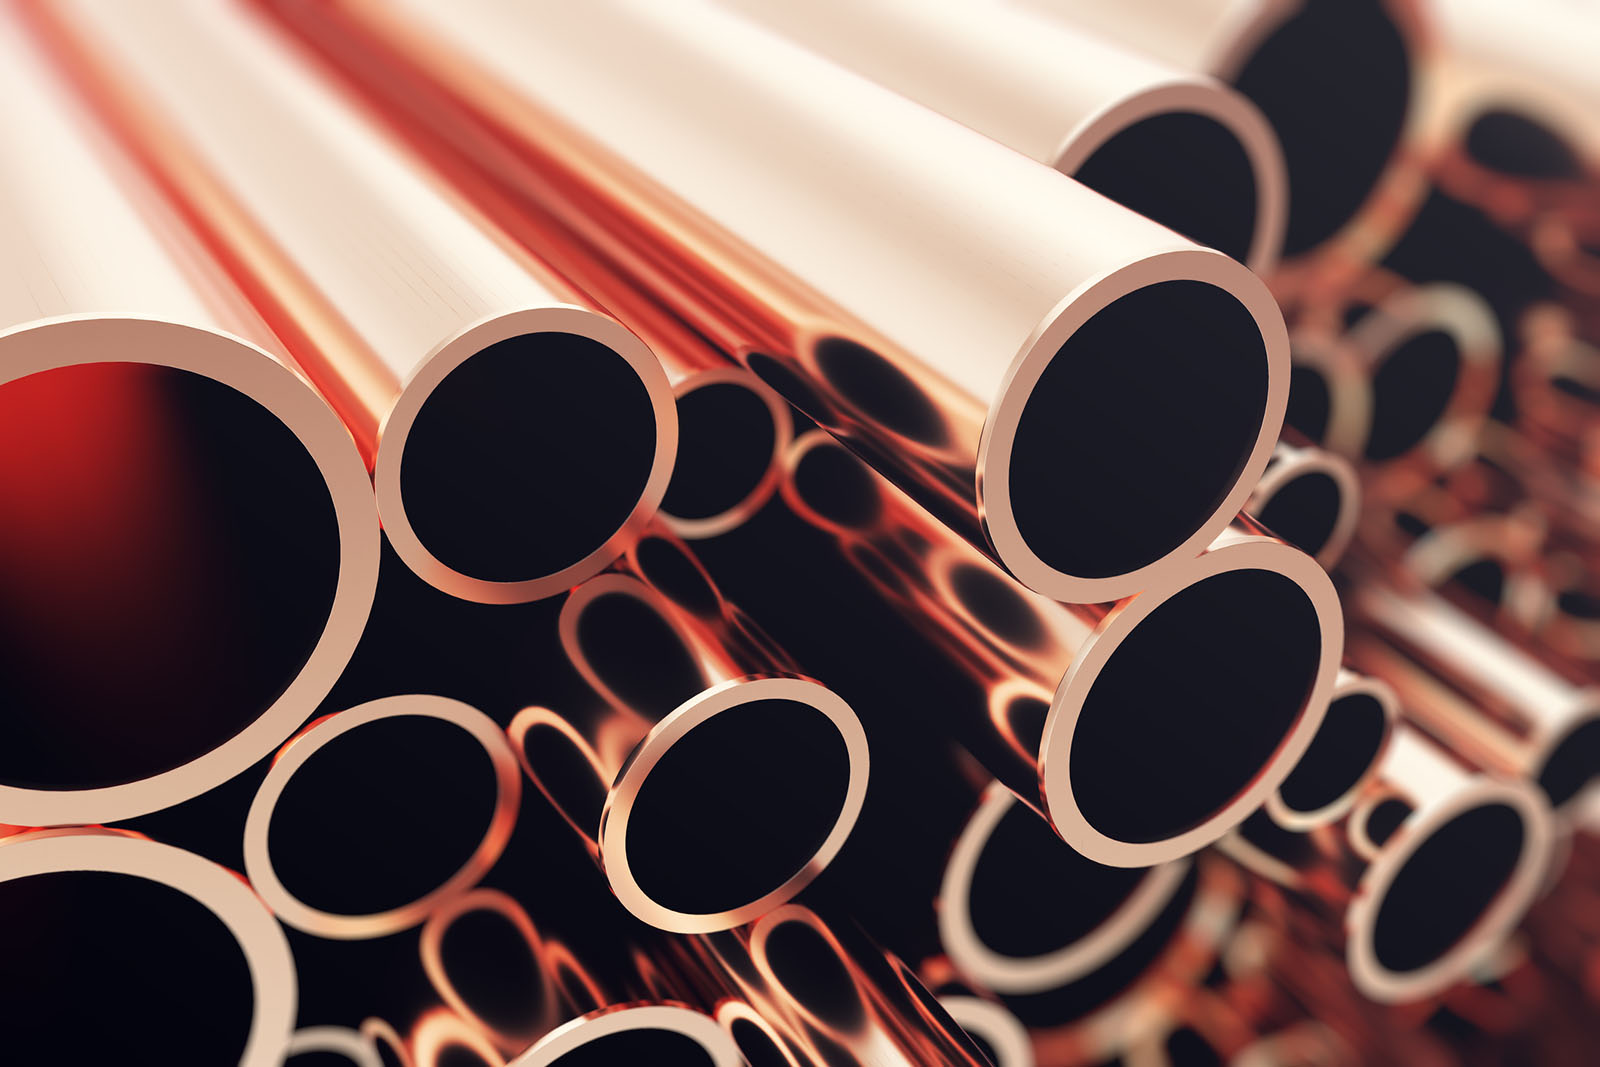 What Type of Copper Pipes to Get for Your Home